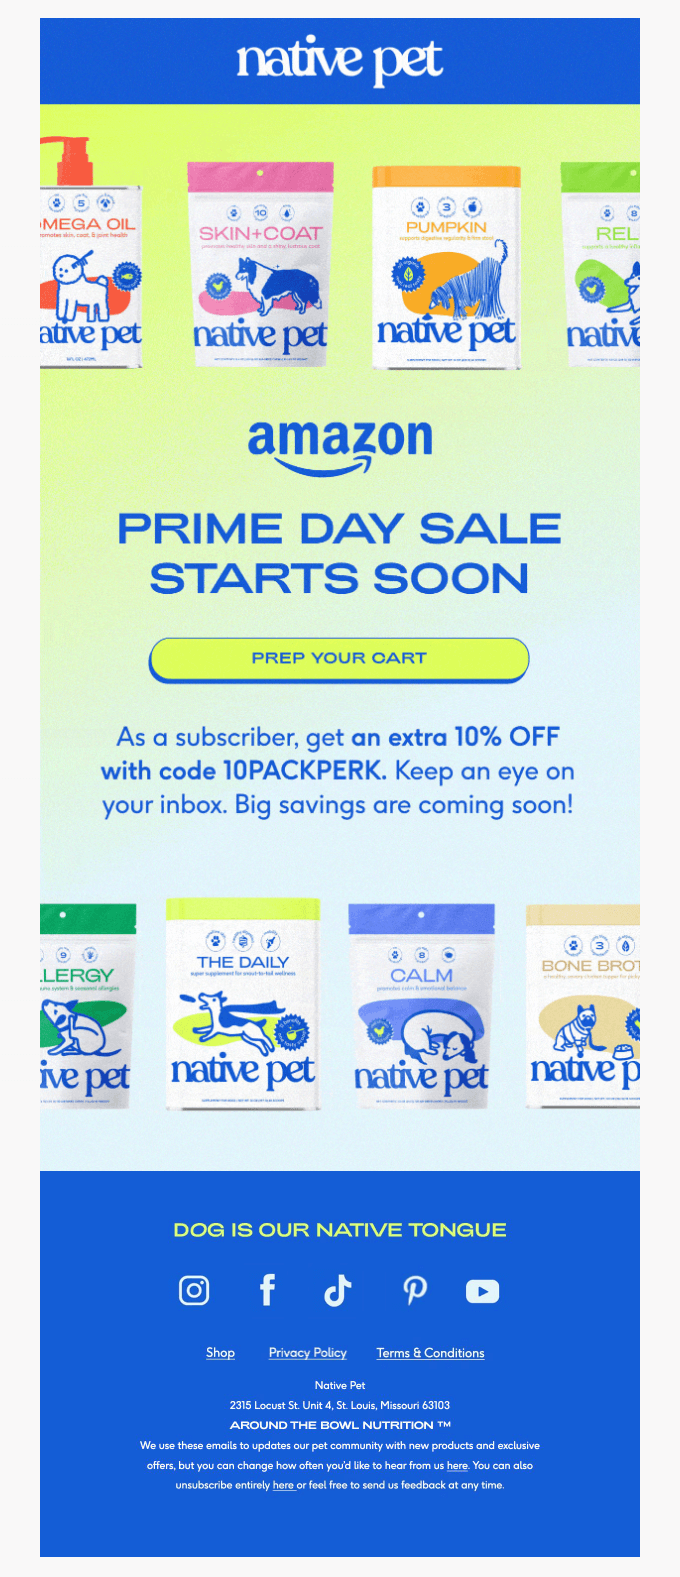 prime day is coming...